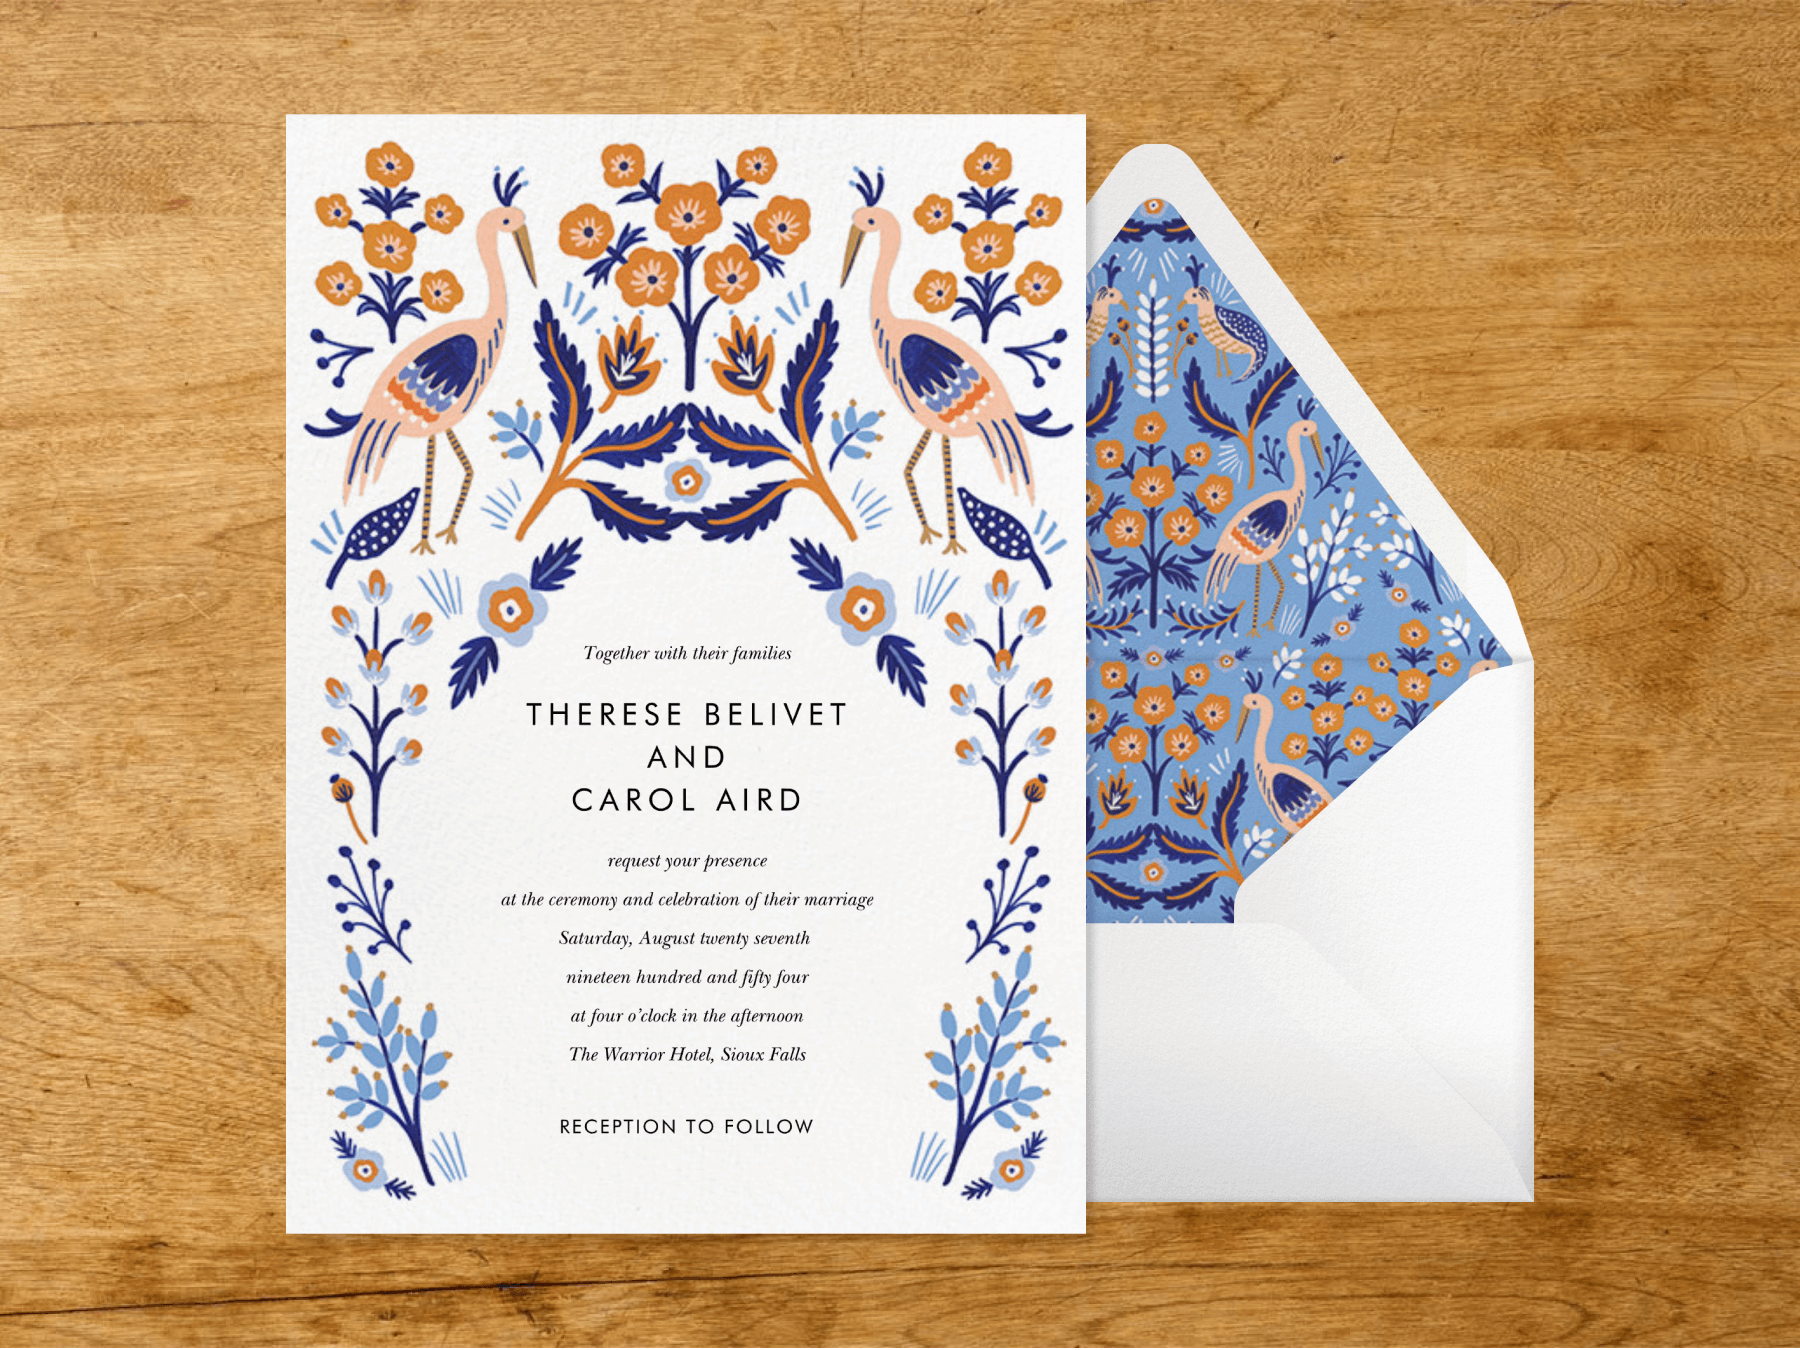 A white wedding invitation with simplistic orange and blue illustration of leaves, flowers, and long-necked birds forming a border beside a white envelope with a matching illustrated liner on a wood grain background.